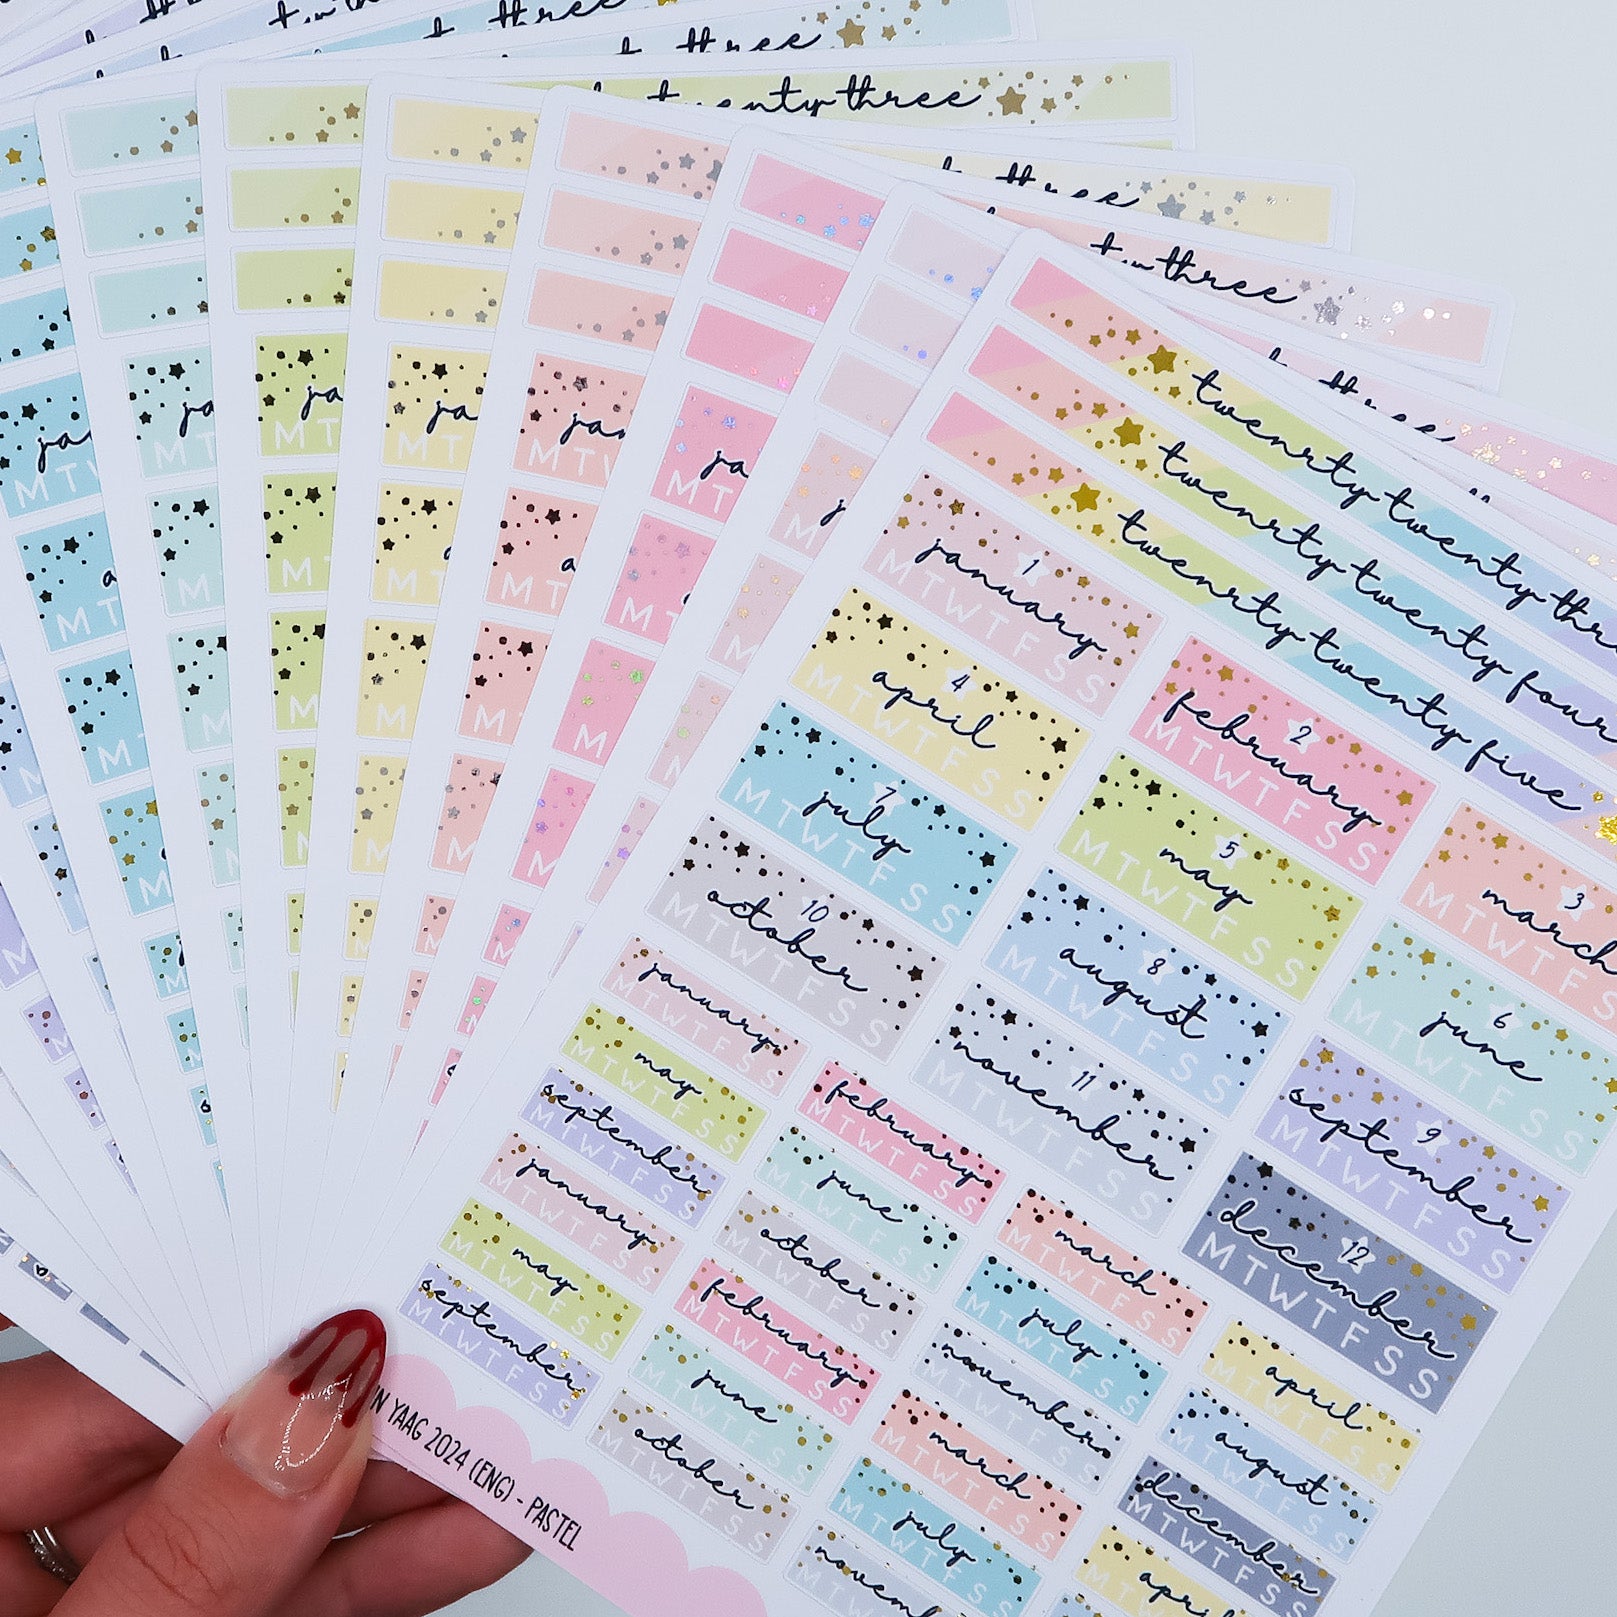 Hobonichi Cousin Foiled Year At A Glance 2024 - Pastel – Josephine Bow